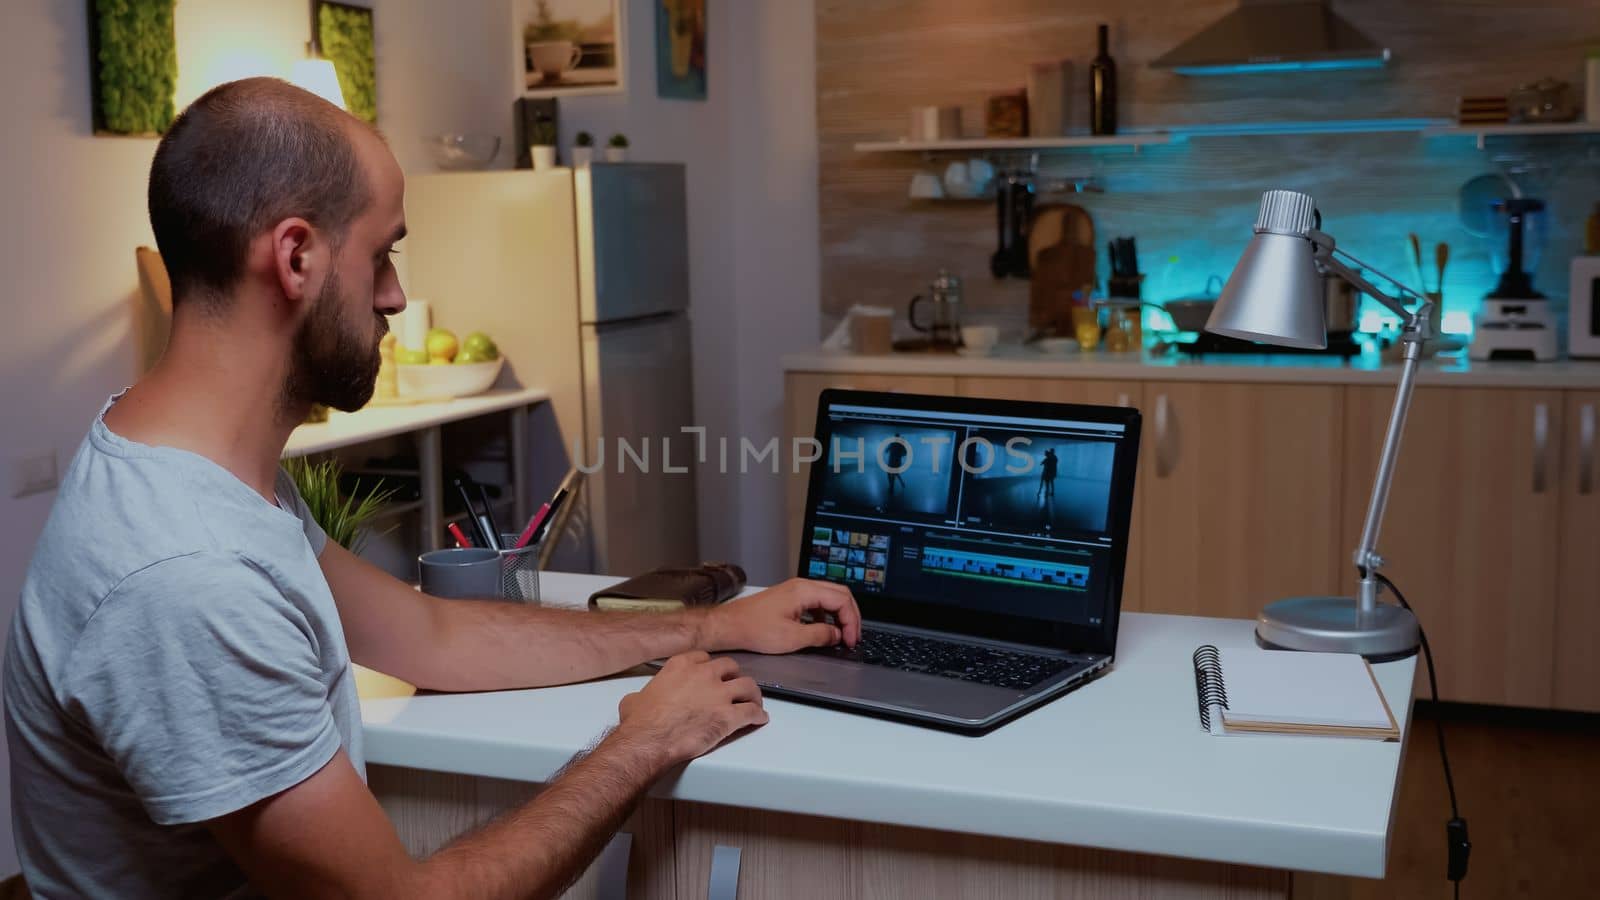 Content creator working remotely on laptop from home during night time. Videographer editing audio film montage on professional laptop sitting on desk in modern kitchen in midnight